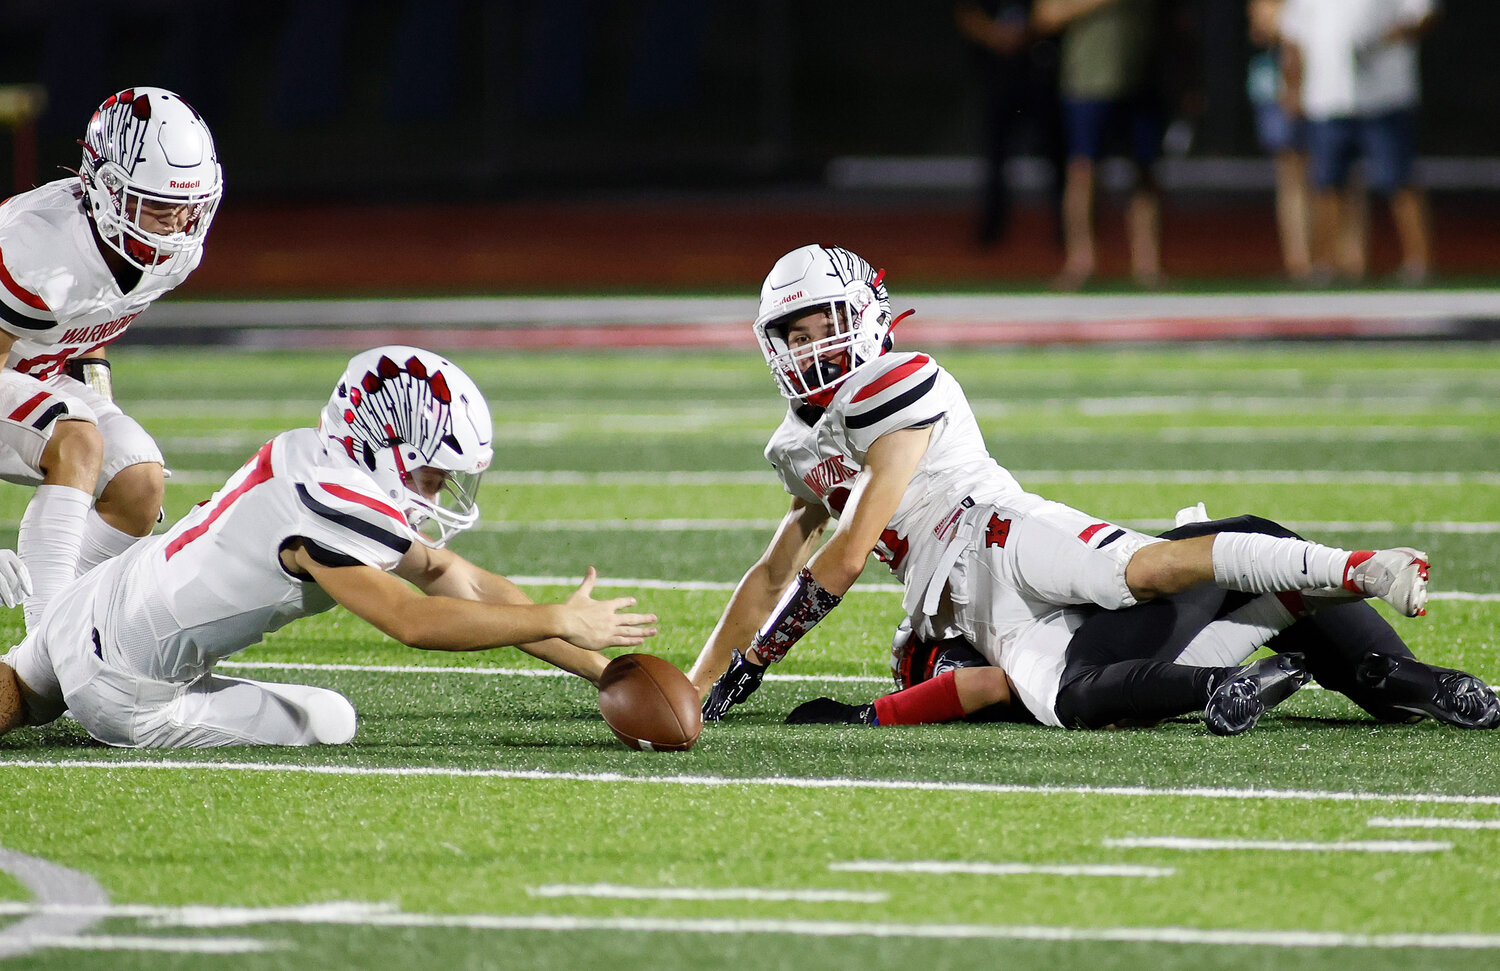 Warrenton's Brody Reel (17) dives for a loose ball during a game against Fort Zumwalt South, Friday, Aug. 25, 2023, at Fort Zumwalt South High School in St. Peters, Mo.